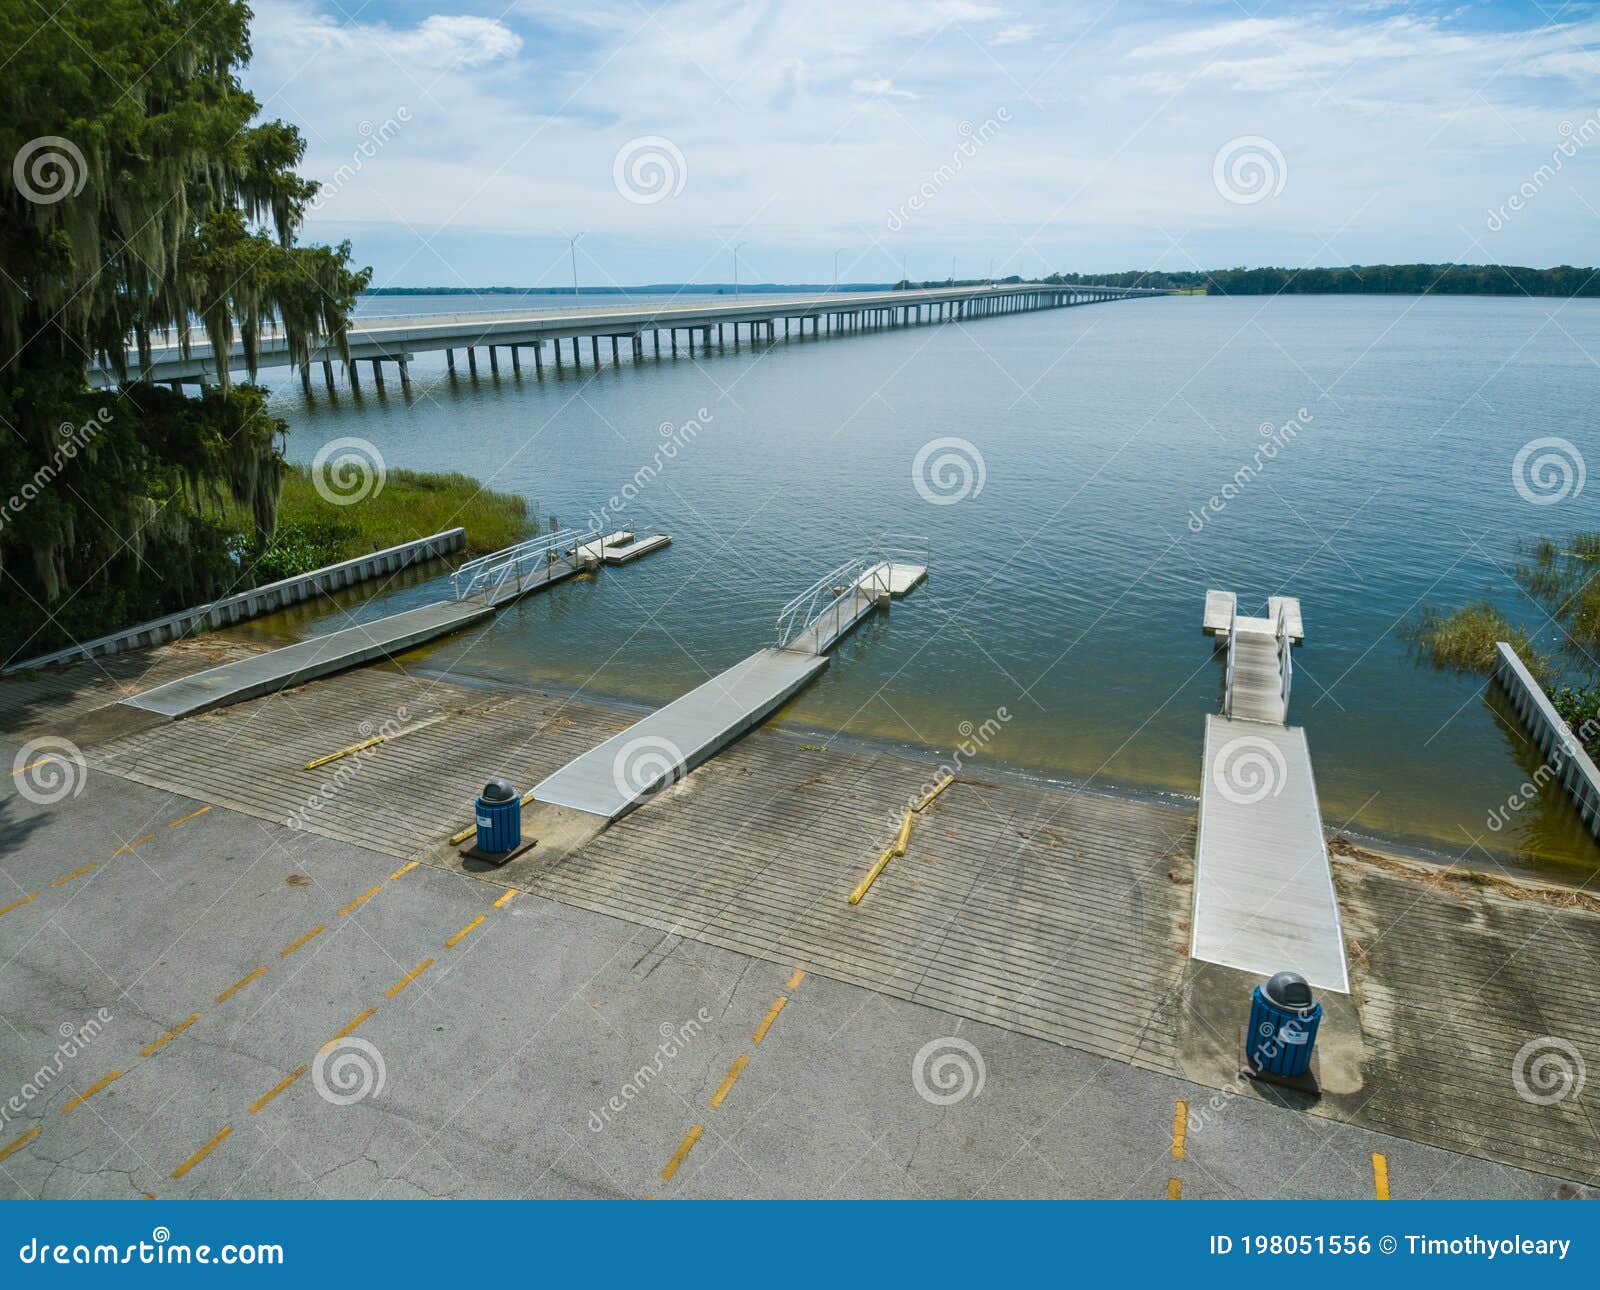 aerial photograph of lake harris at tavares florida usa with highway 19